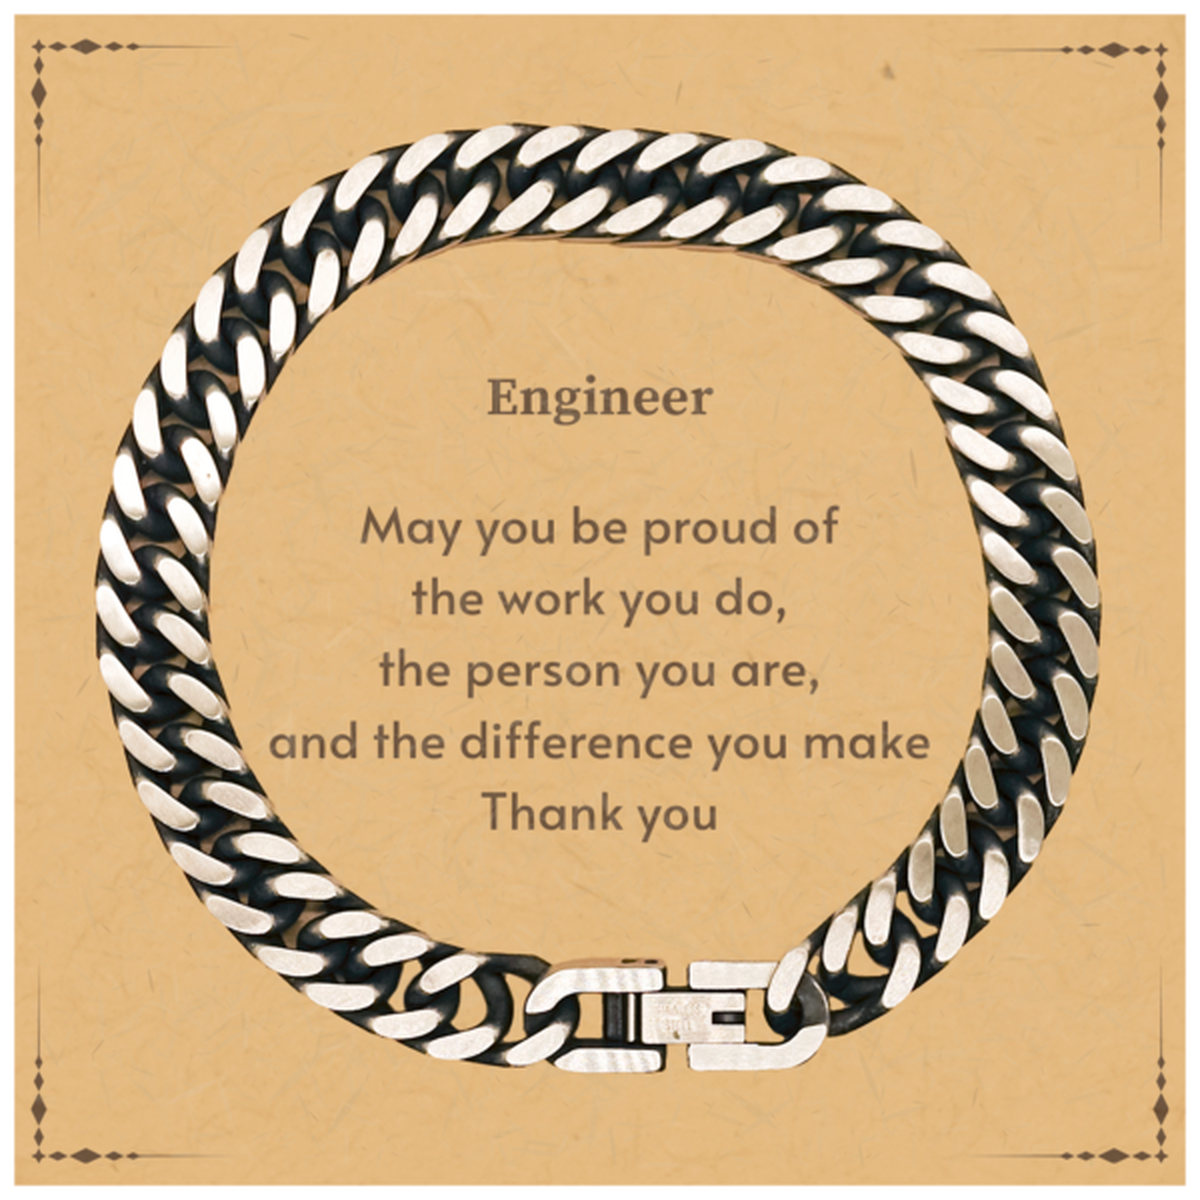 Heartwarming Cuban Link Chain Bracelet Retirement Coworkers Gifts for Engineer, Engineer May You be proud of the work you do, the person you are Gifts for Boss Men Women Friends